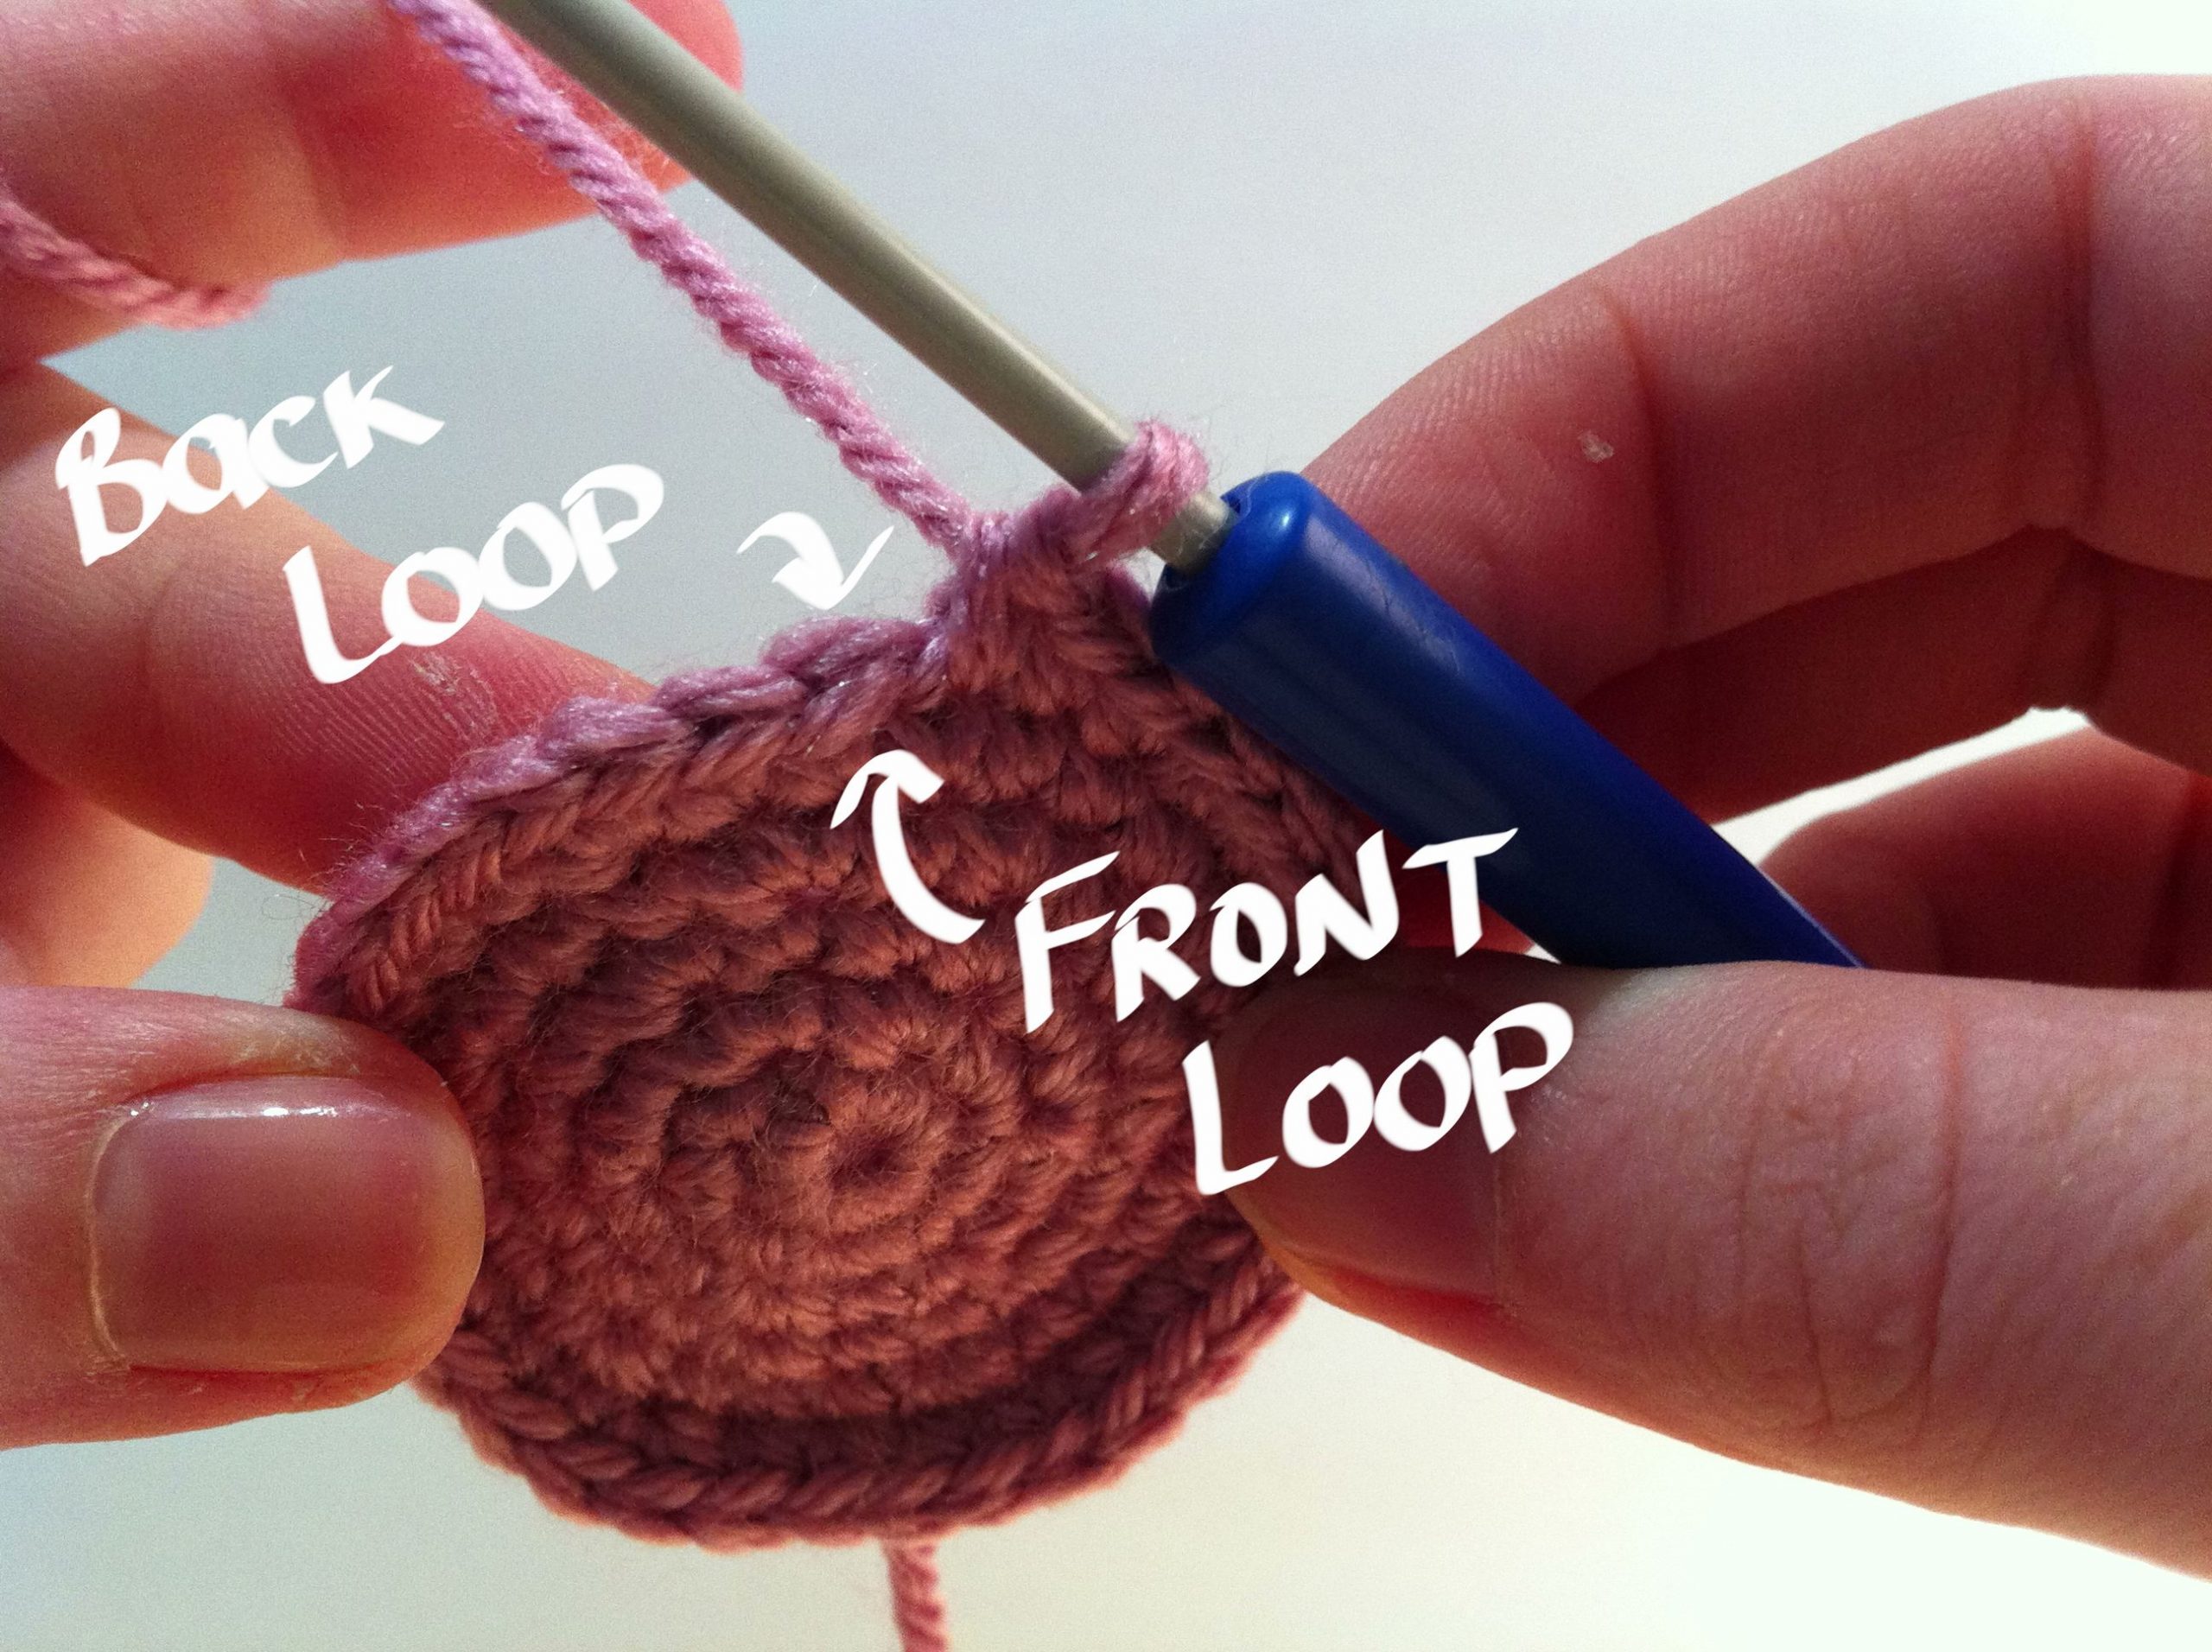 Picture of a single crochet pointing out which is the front loop and which is the back loop